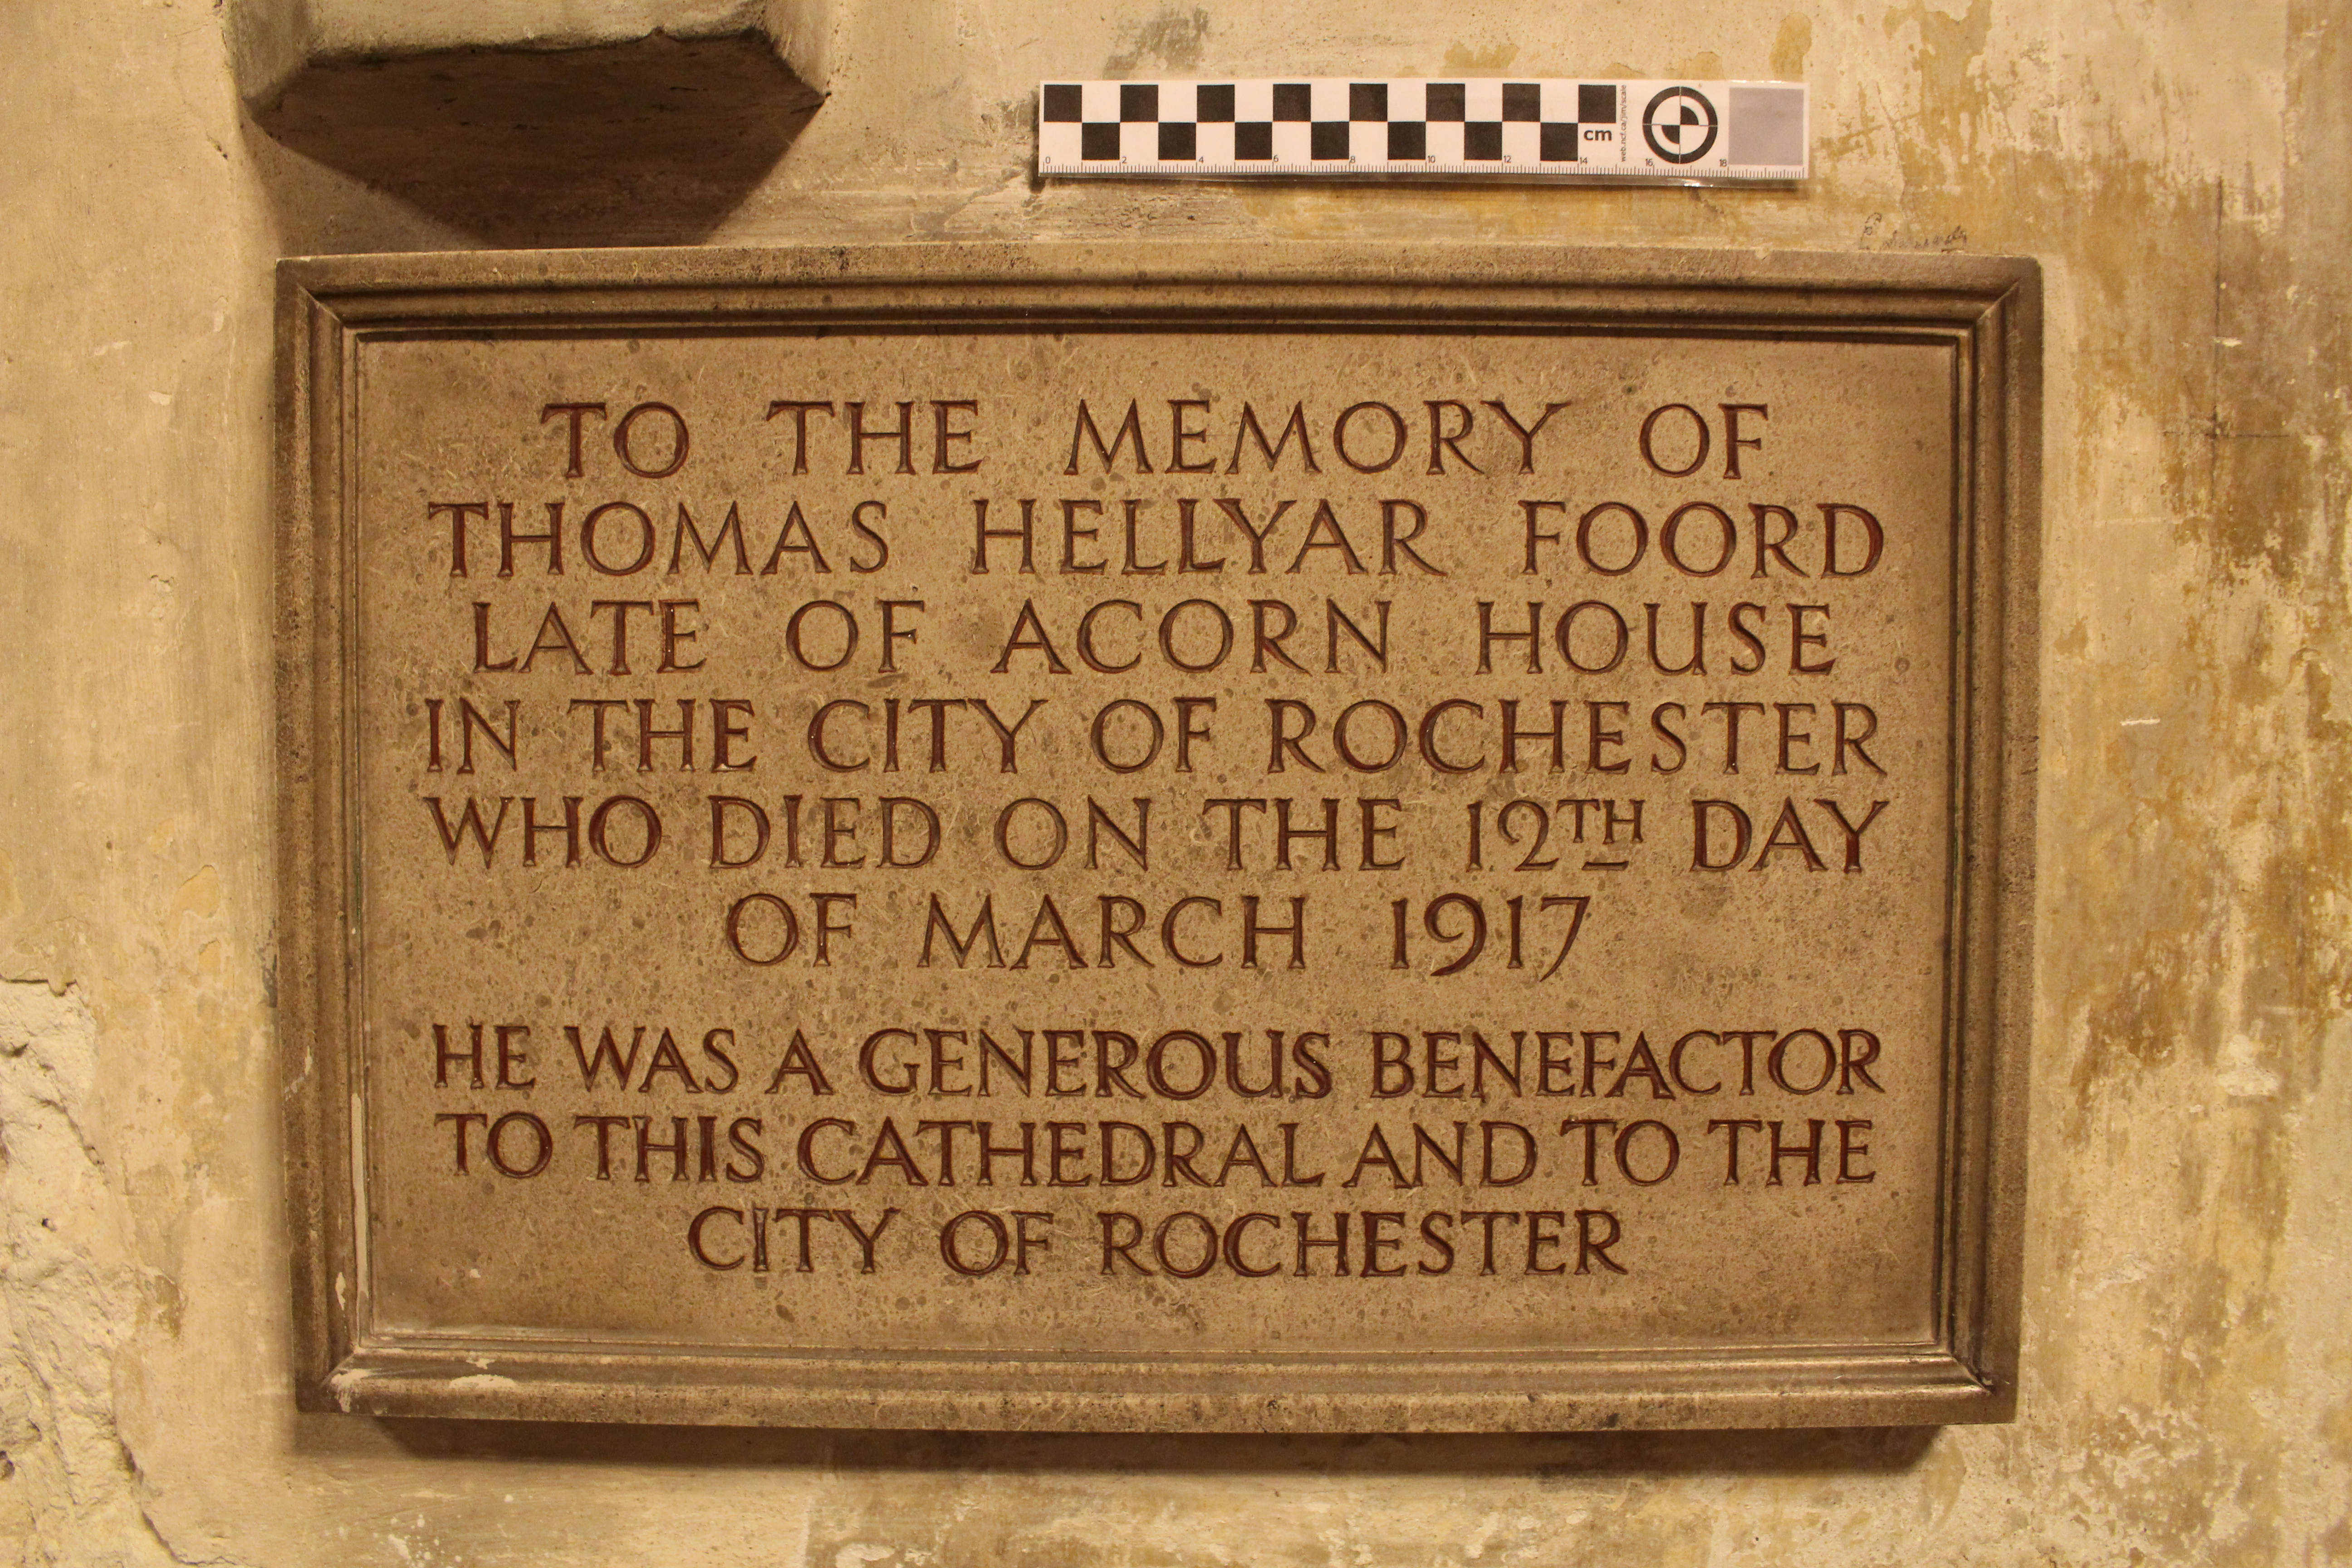 Photograph of the memorial dedicated to Thomas Hellyer Foord.